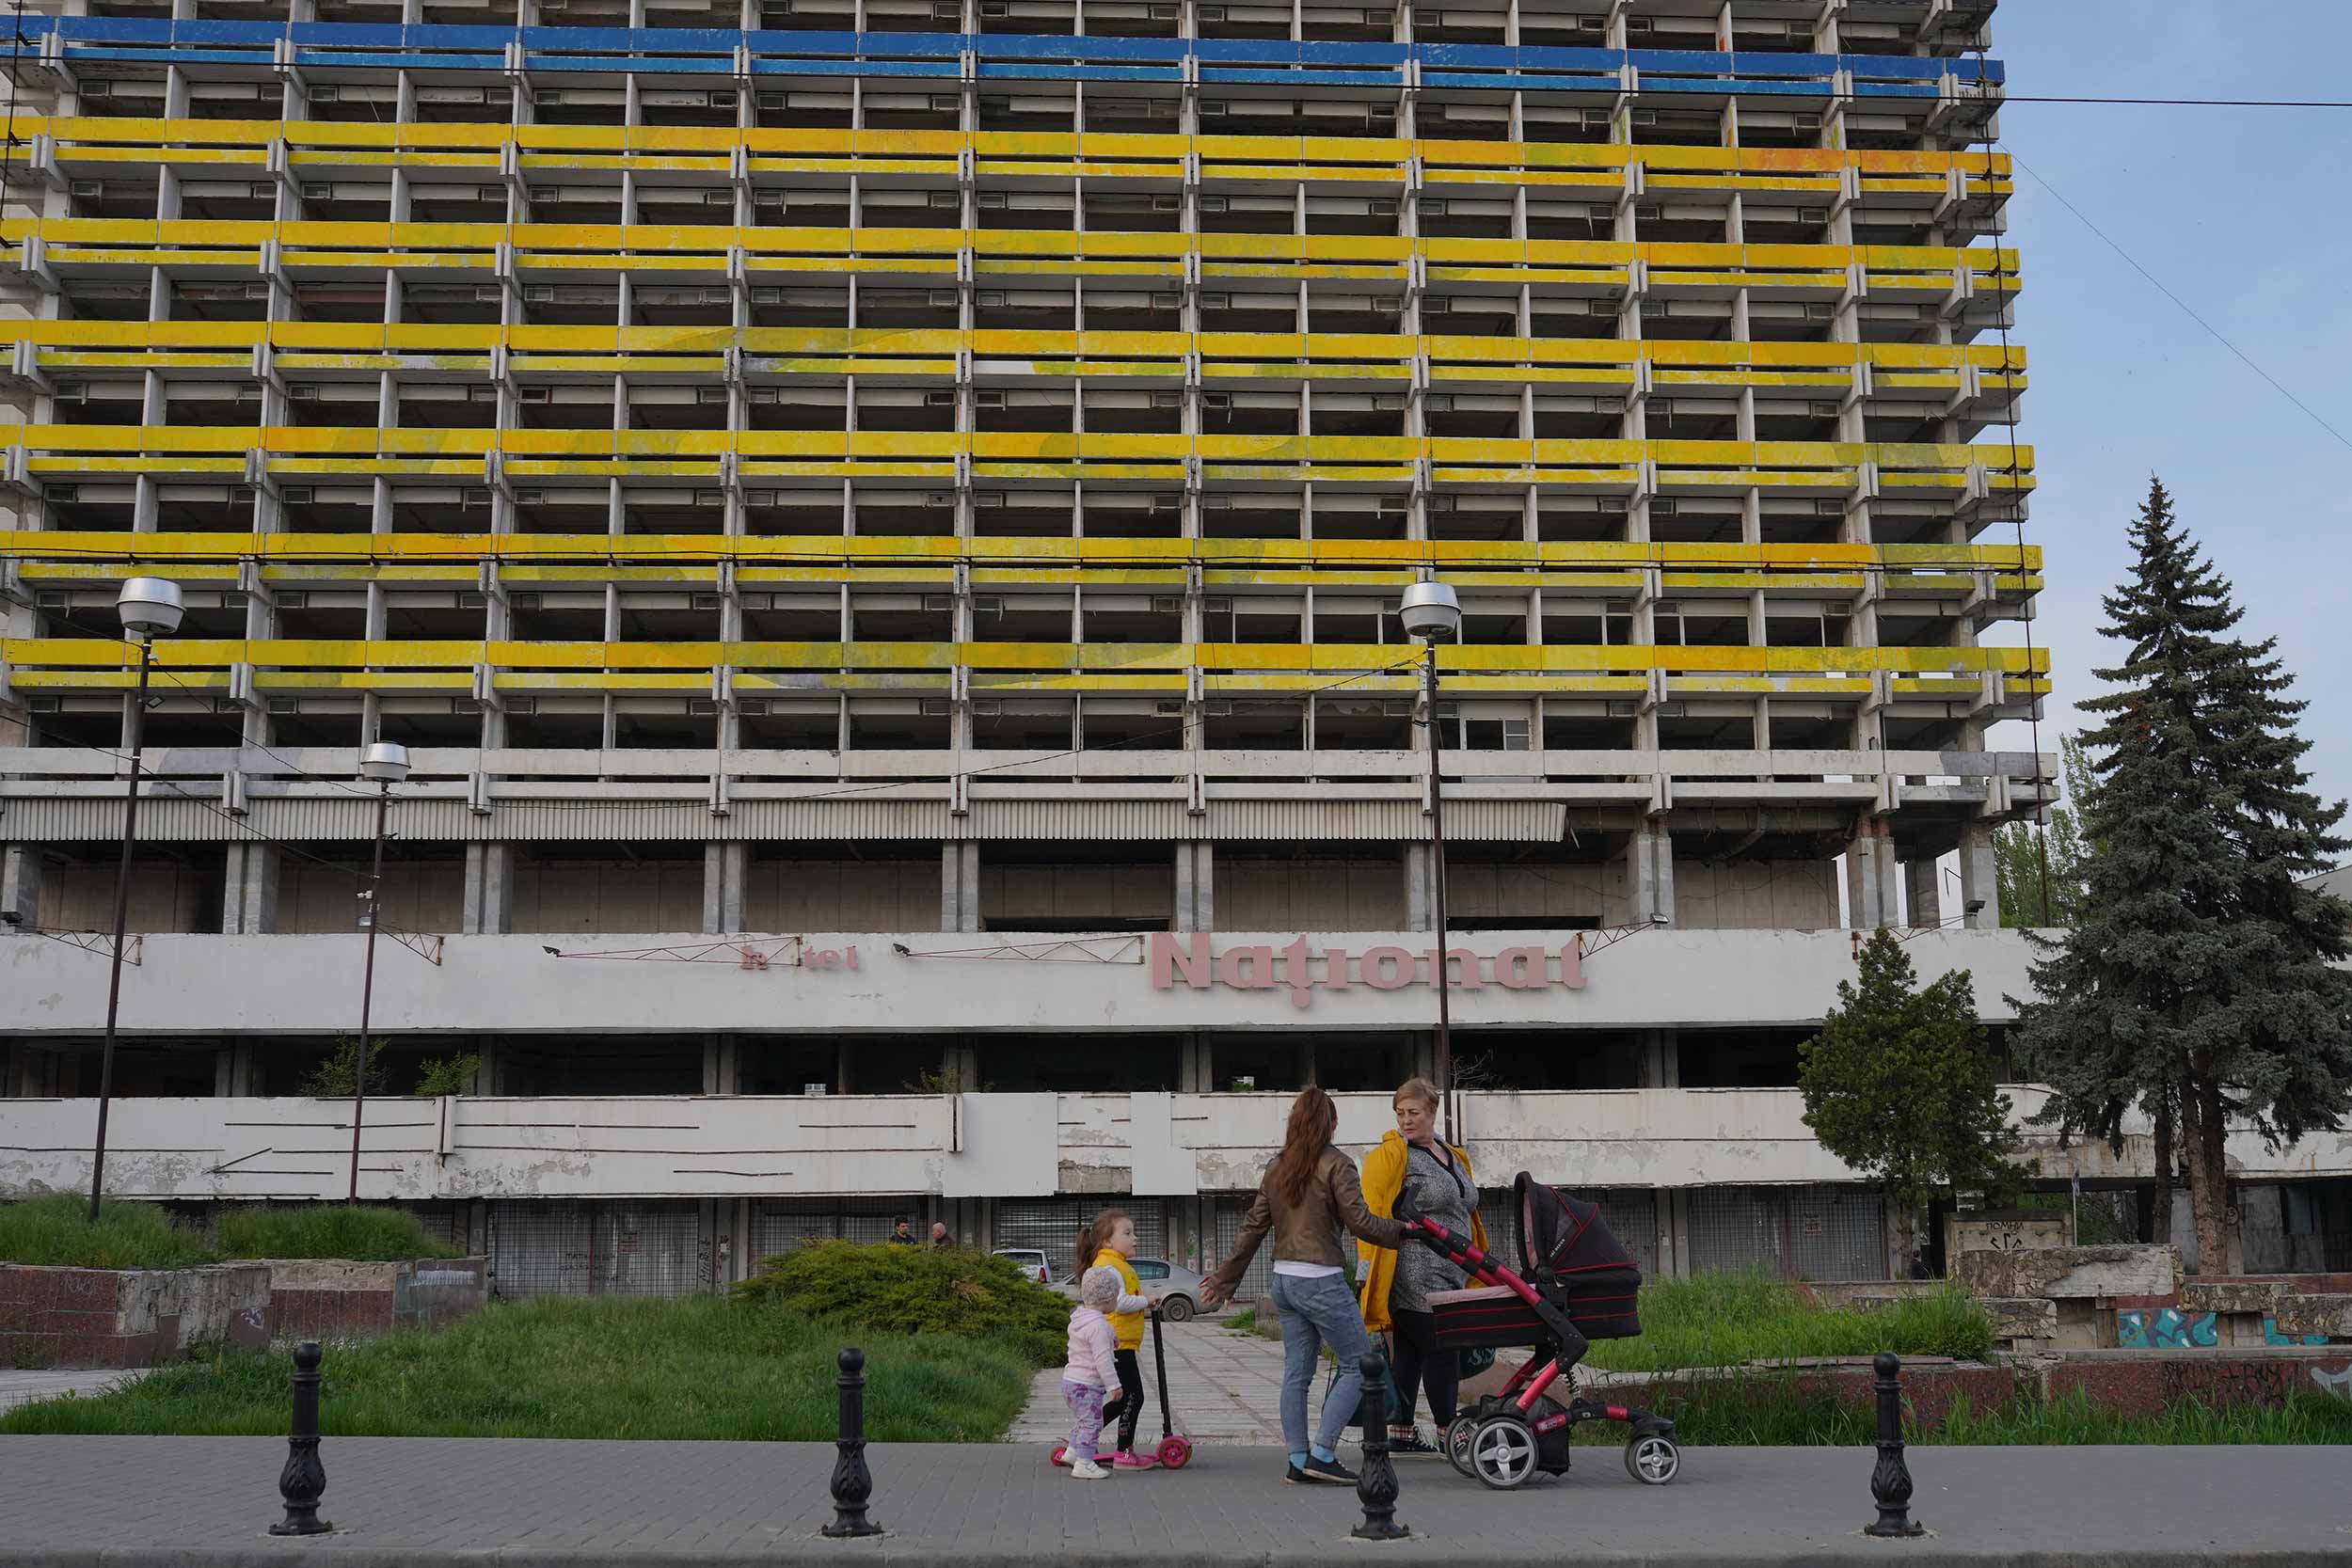 A family walks past the Soviet-era hotel National, now abandoned and painted in the colours of the Ukrainian flag, on May 3, 2022 in Chisinau, Moldova. More than two months into the Russian invasion of Ukraine, fears of the conflict spilling over into Moldova, a country of 2.5 million inhabitants, has increased after two attacks on April 23 and 24 in the separatist region of Transnistria. © Andreea Campeanu/Getty Images